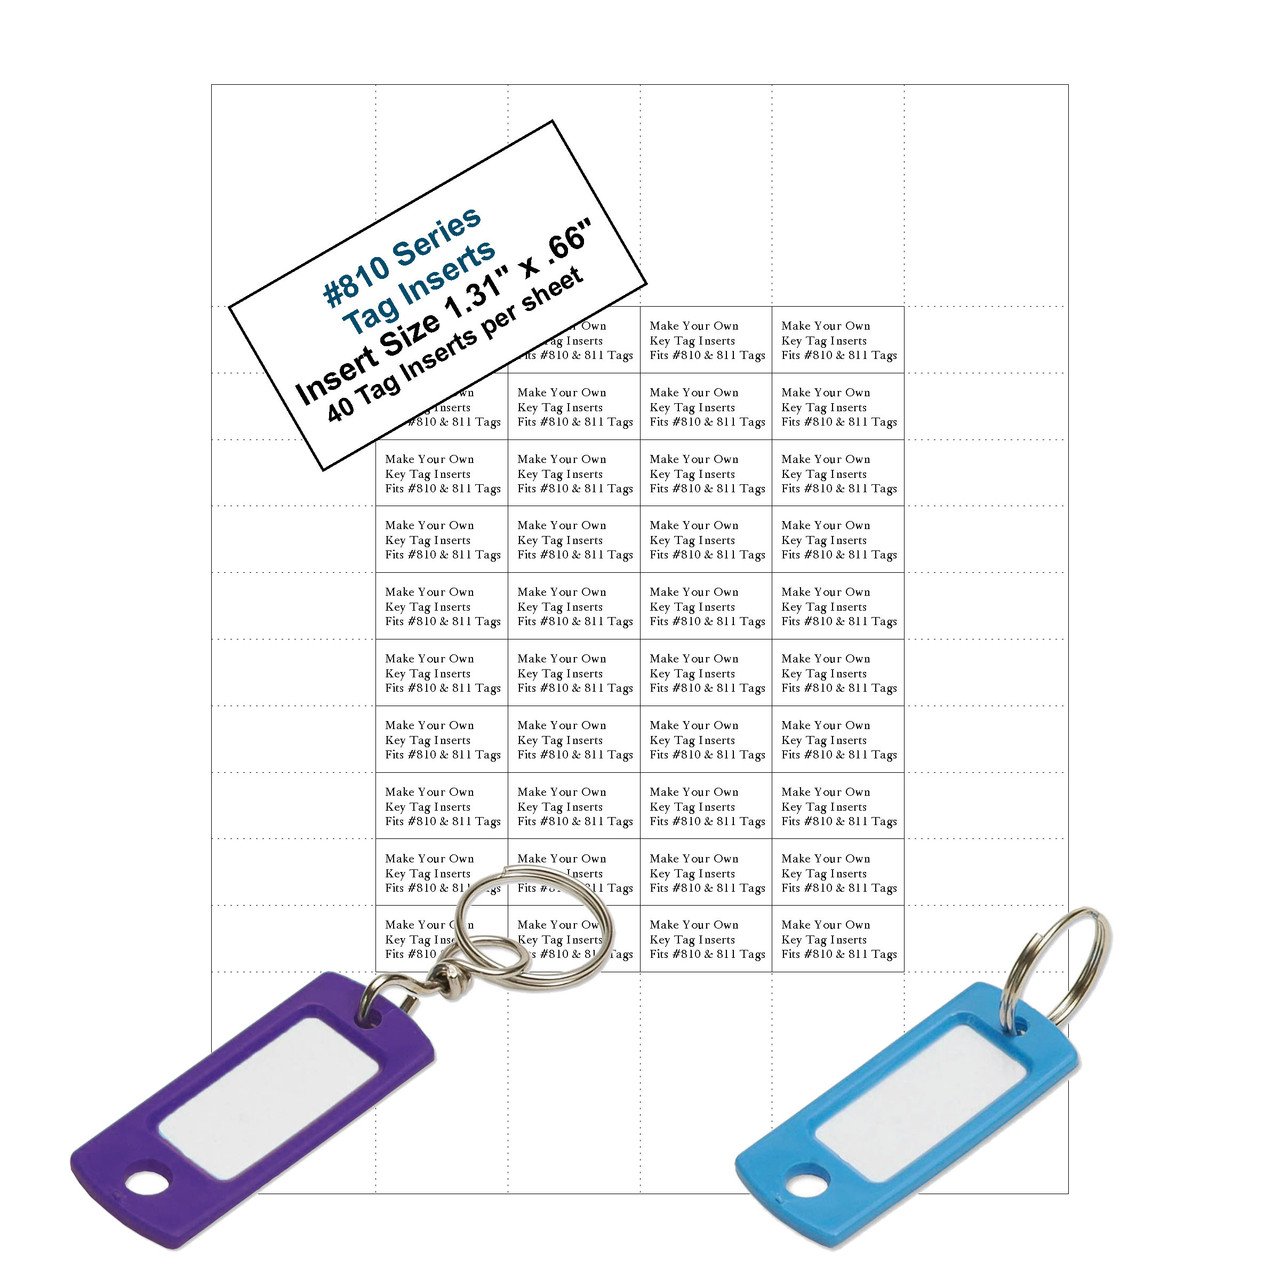 Shop for and Buy Key Identifier Tag Plastic Keytag with Swivel Key Ring -  Pack of 8 at . Large selection and bulk discounts available.